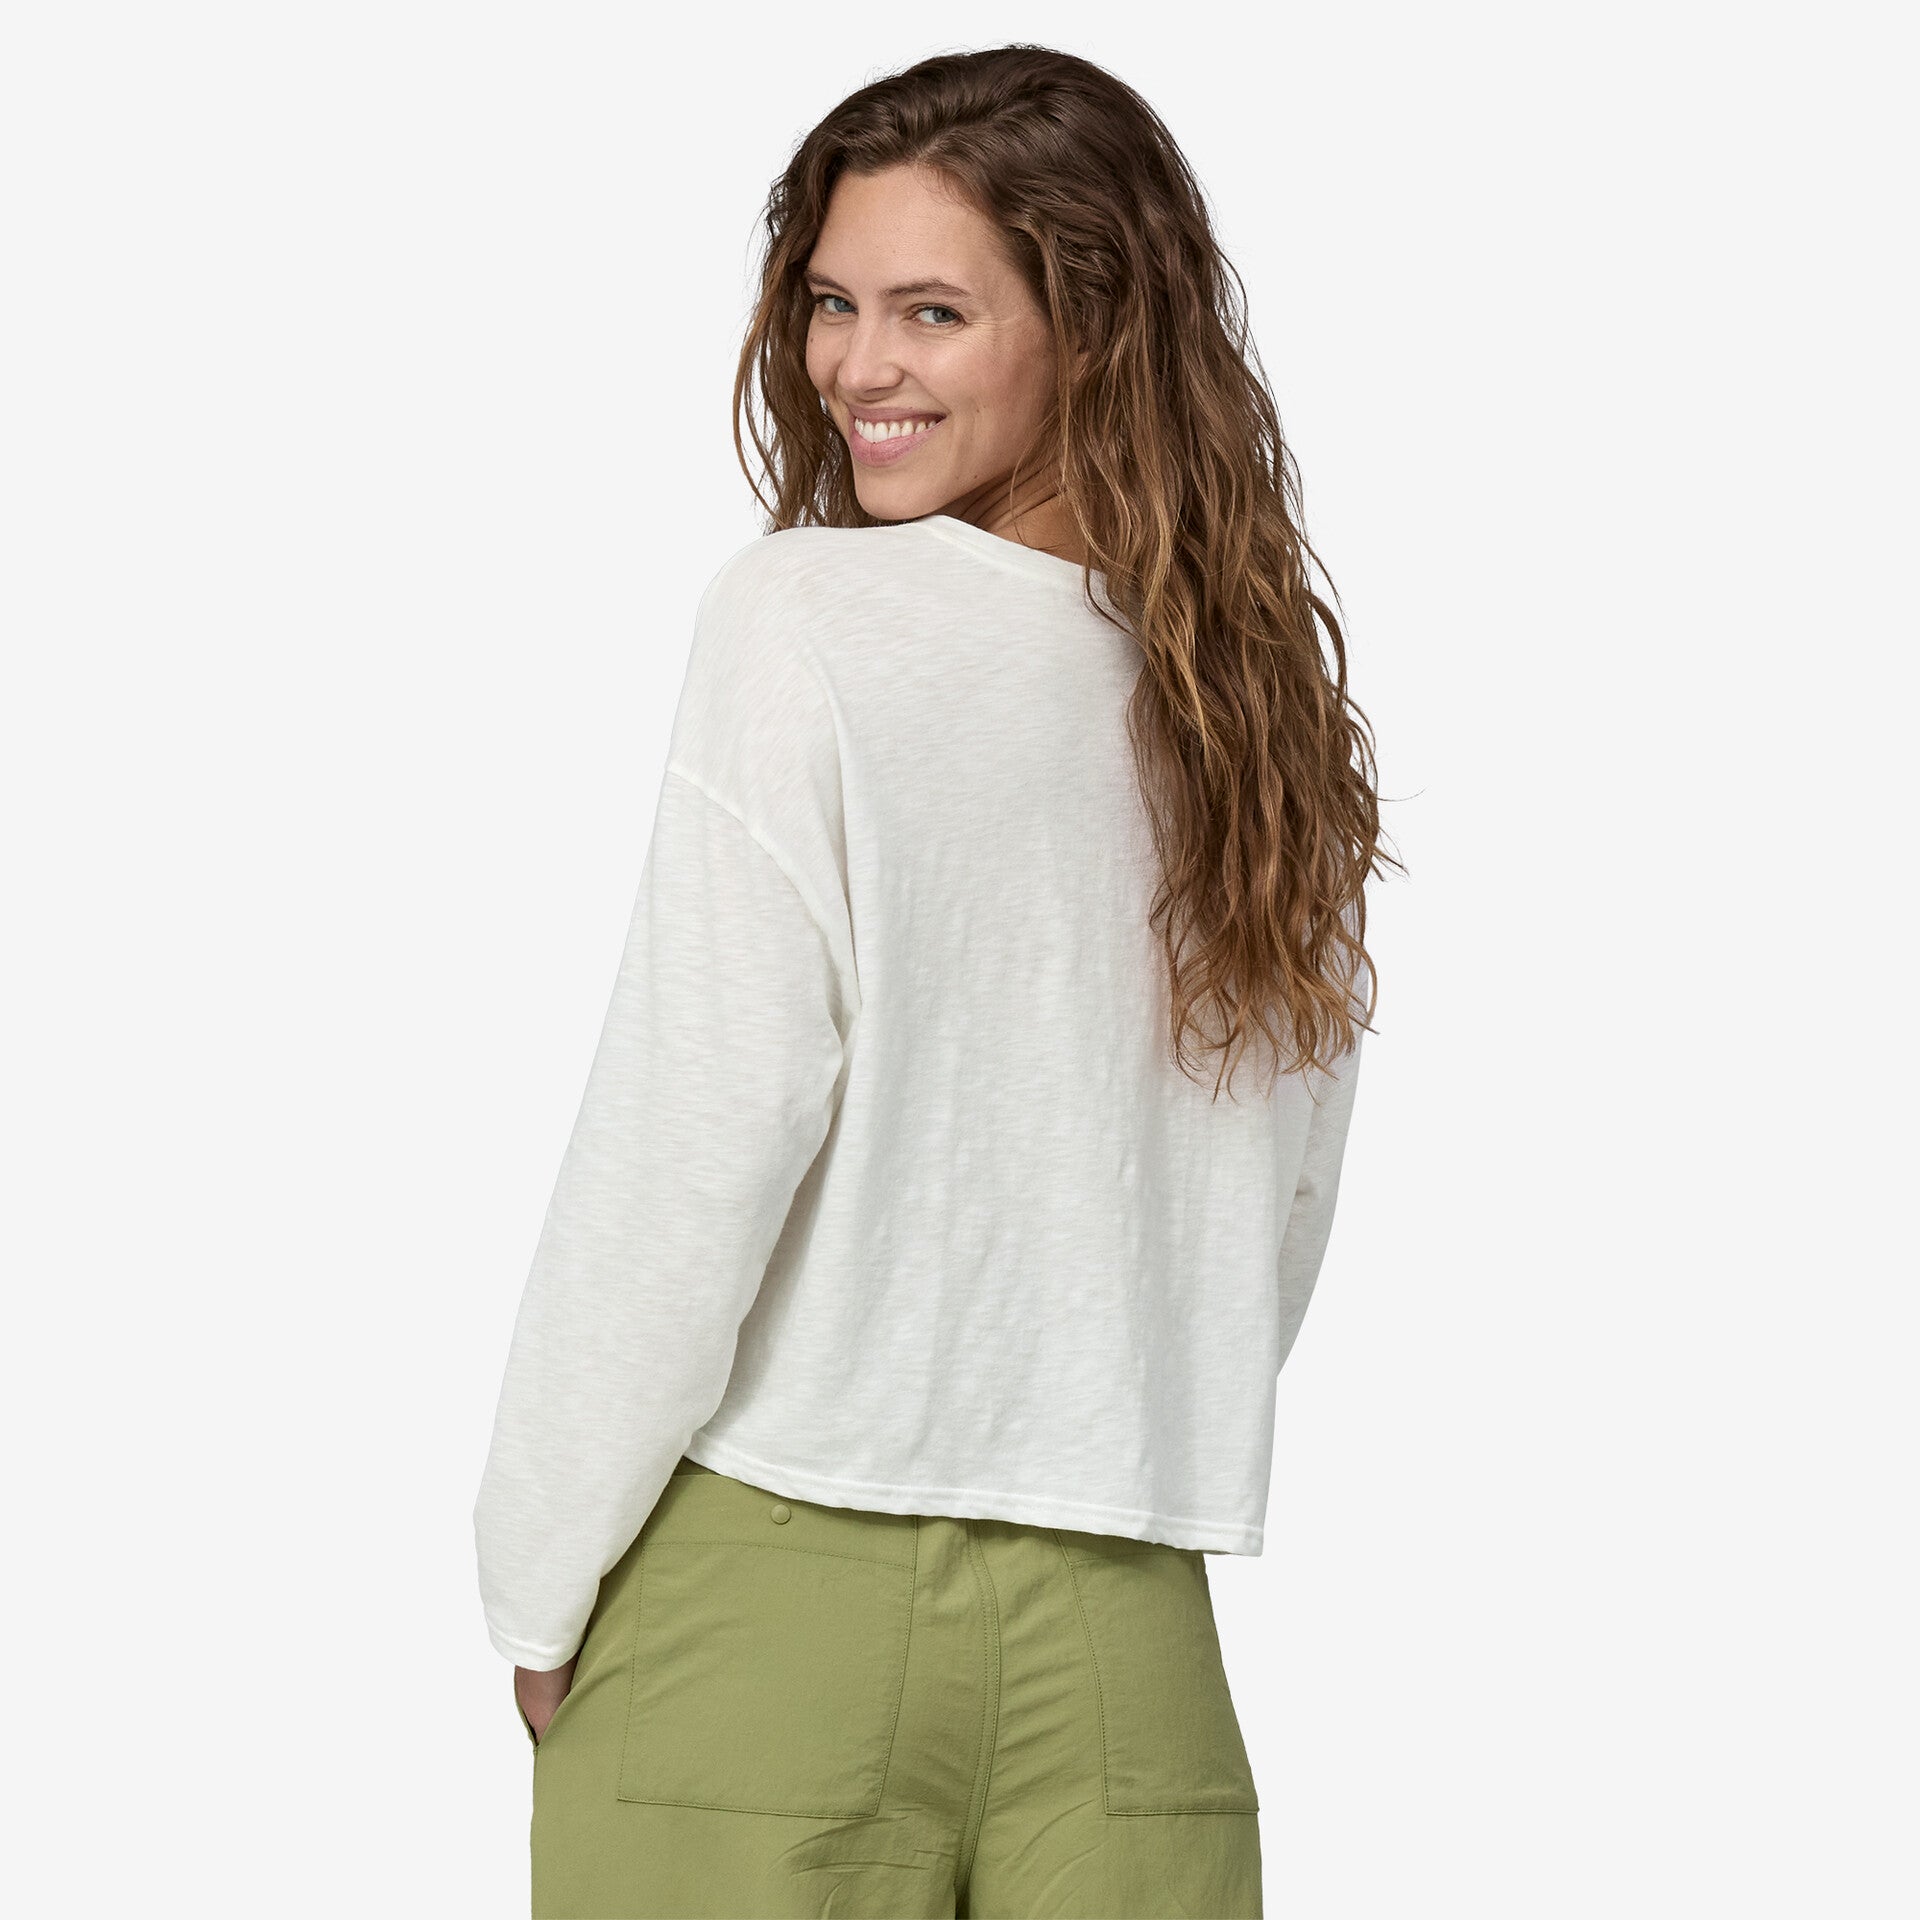 Patagonia Women's Long-Sleeved Mainstay Top